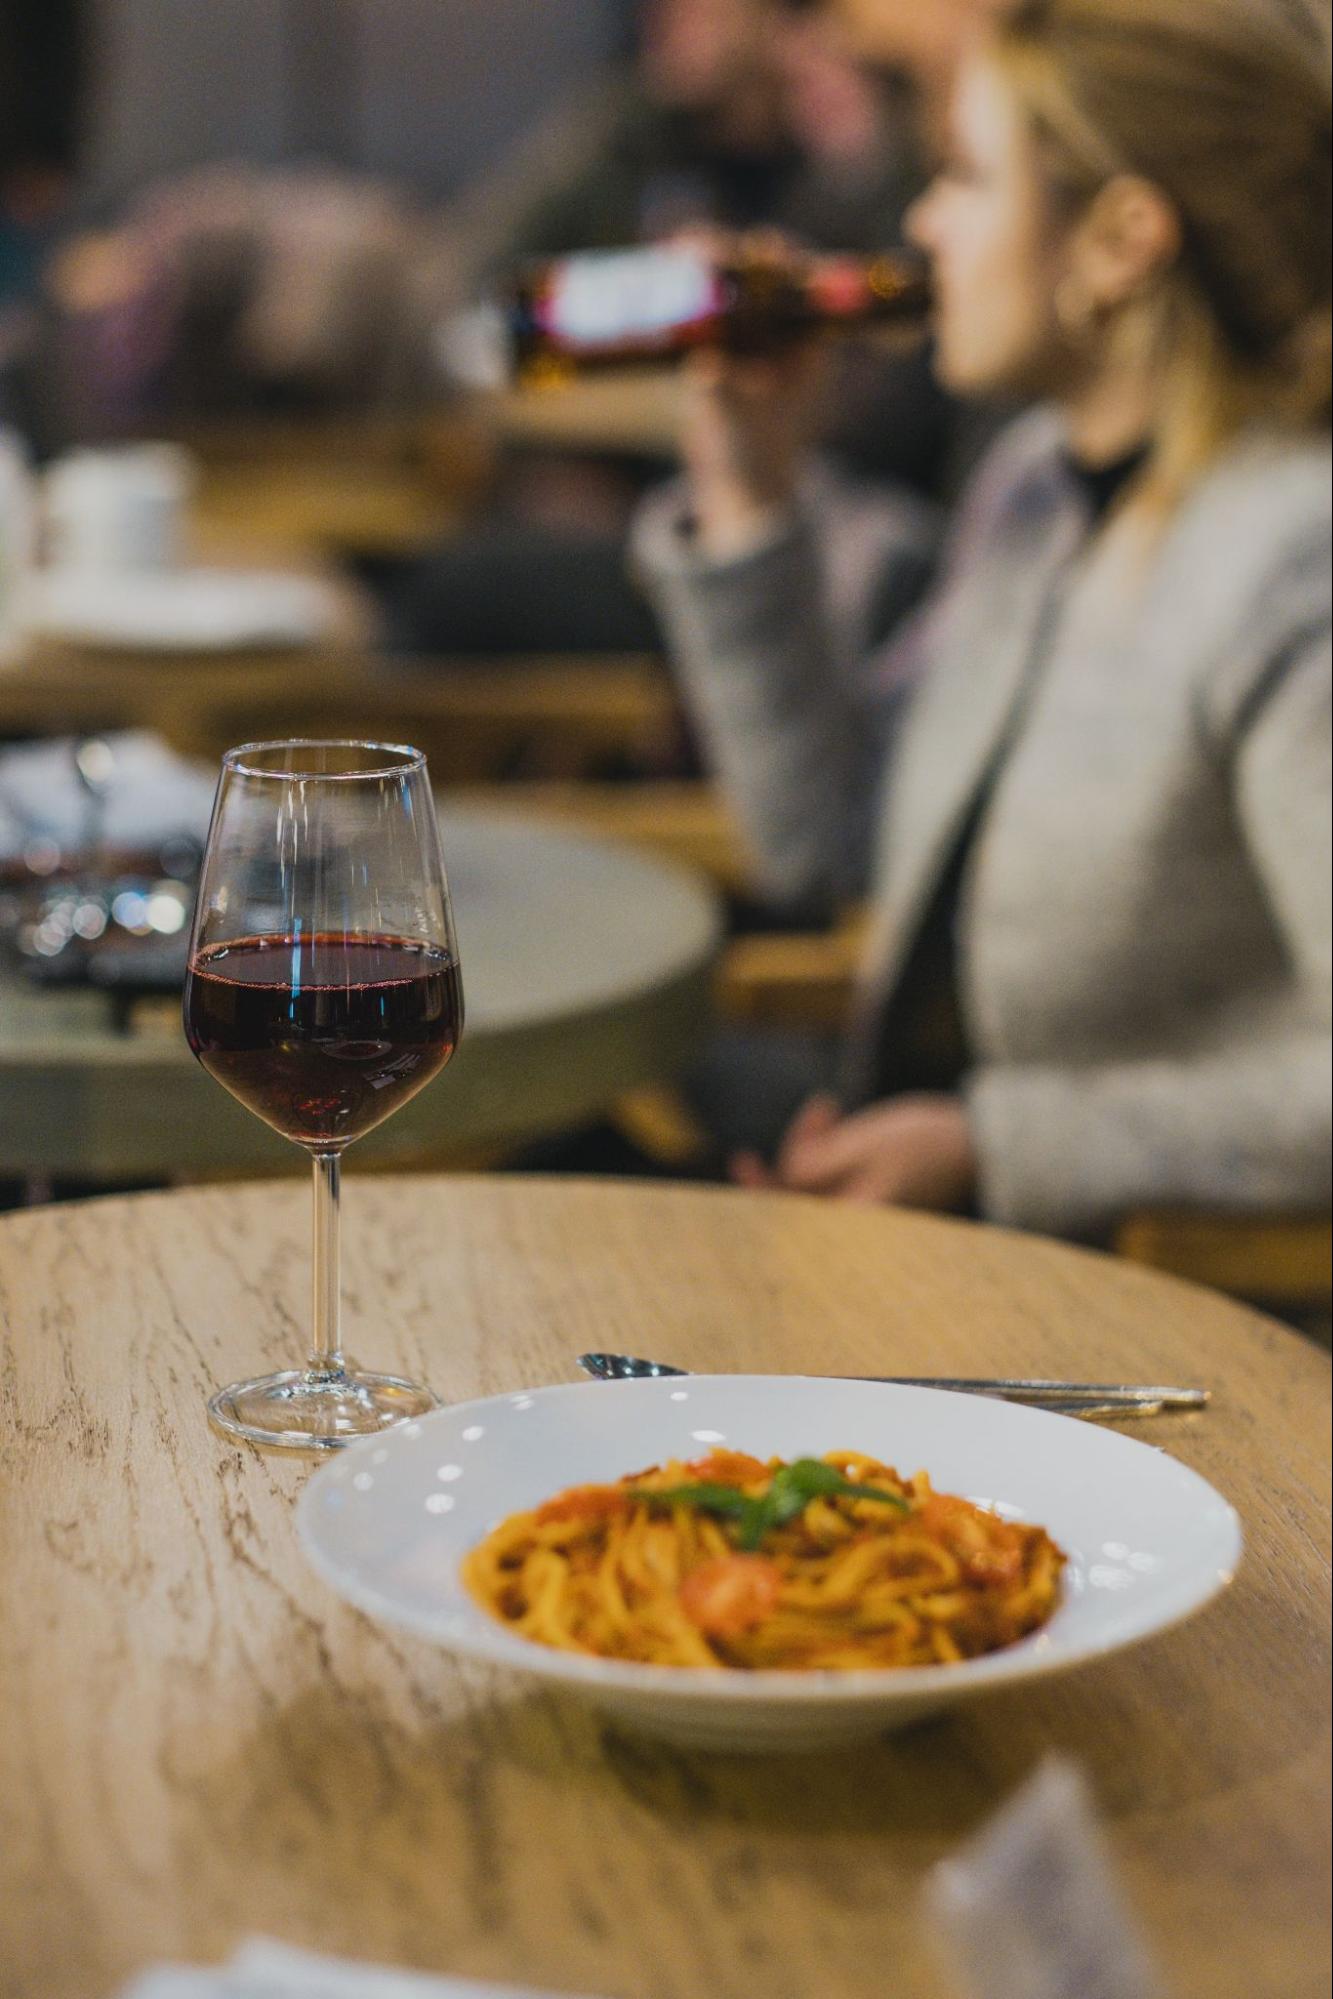 Plate of pasta and a glass of wine on a table